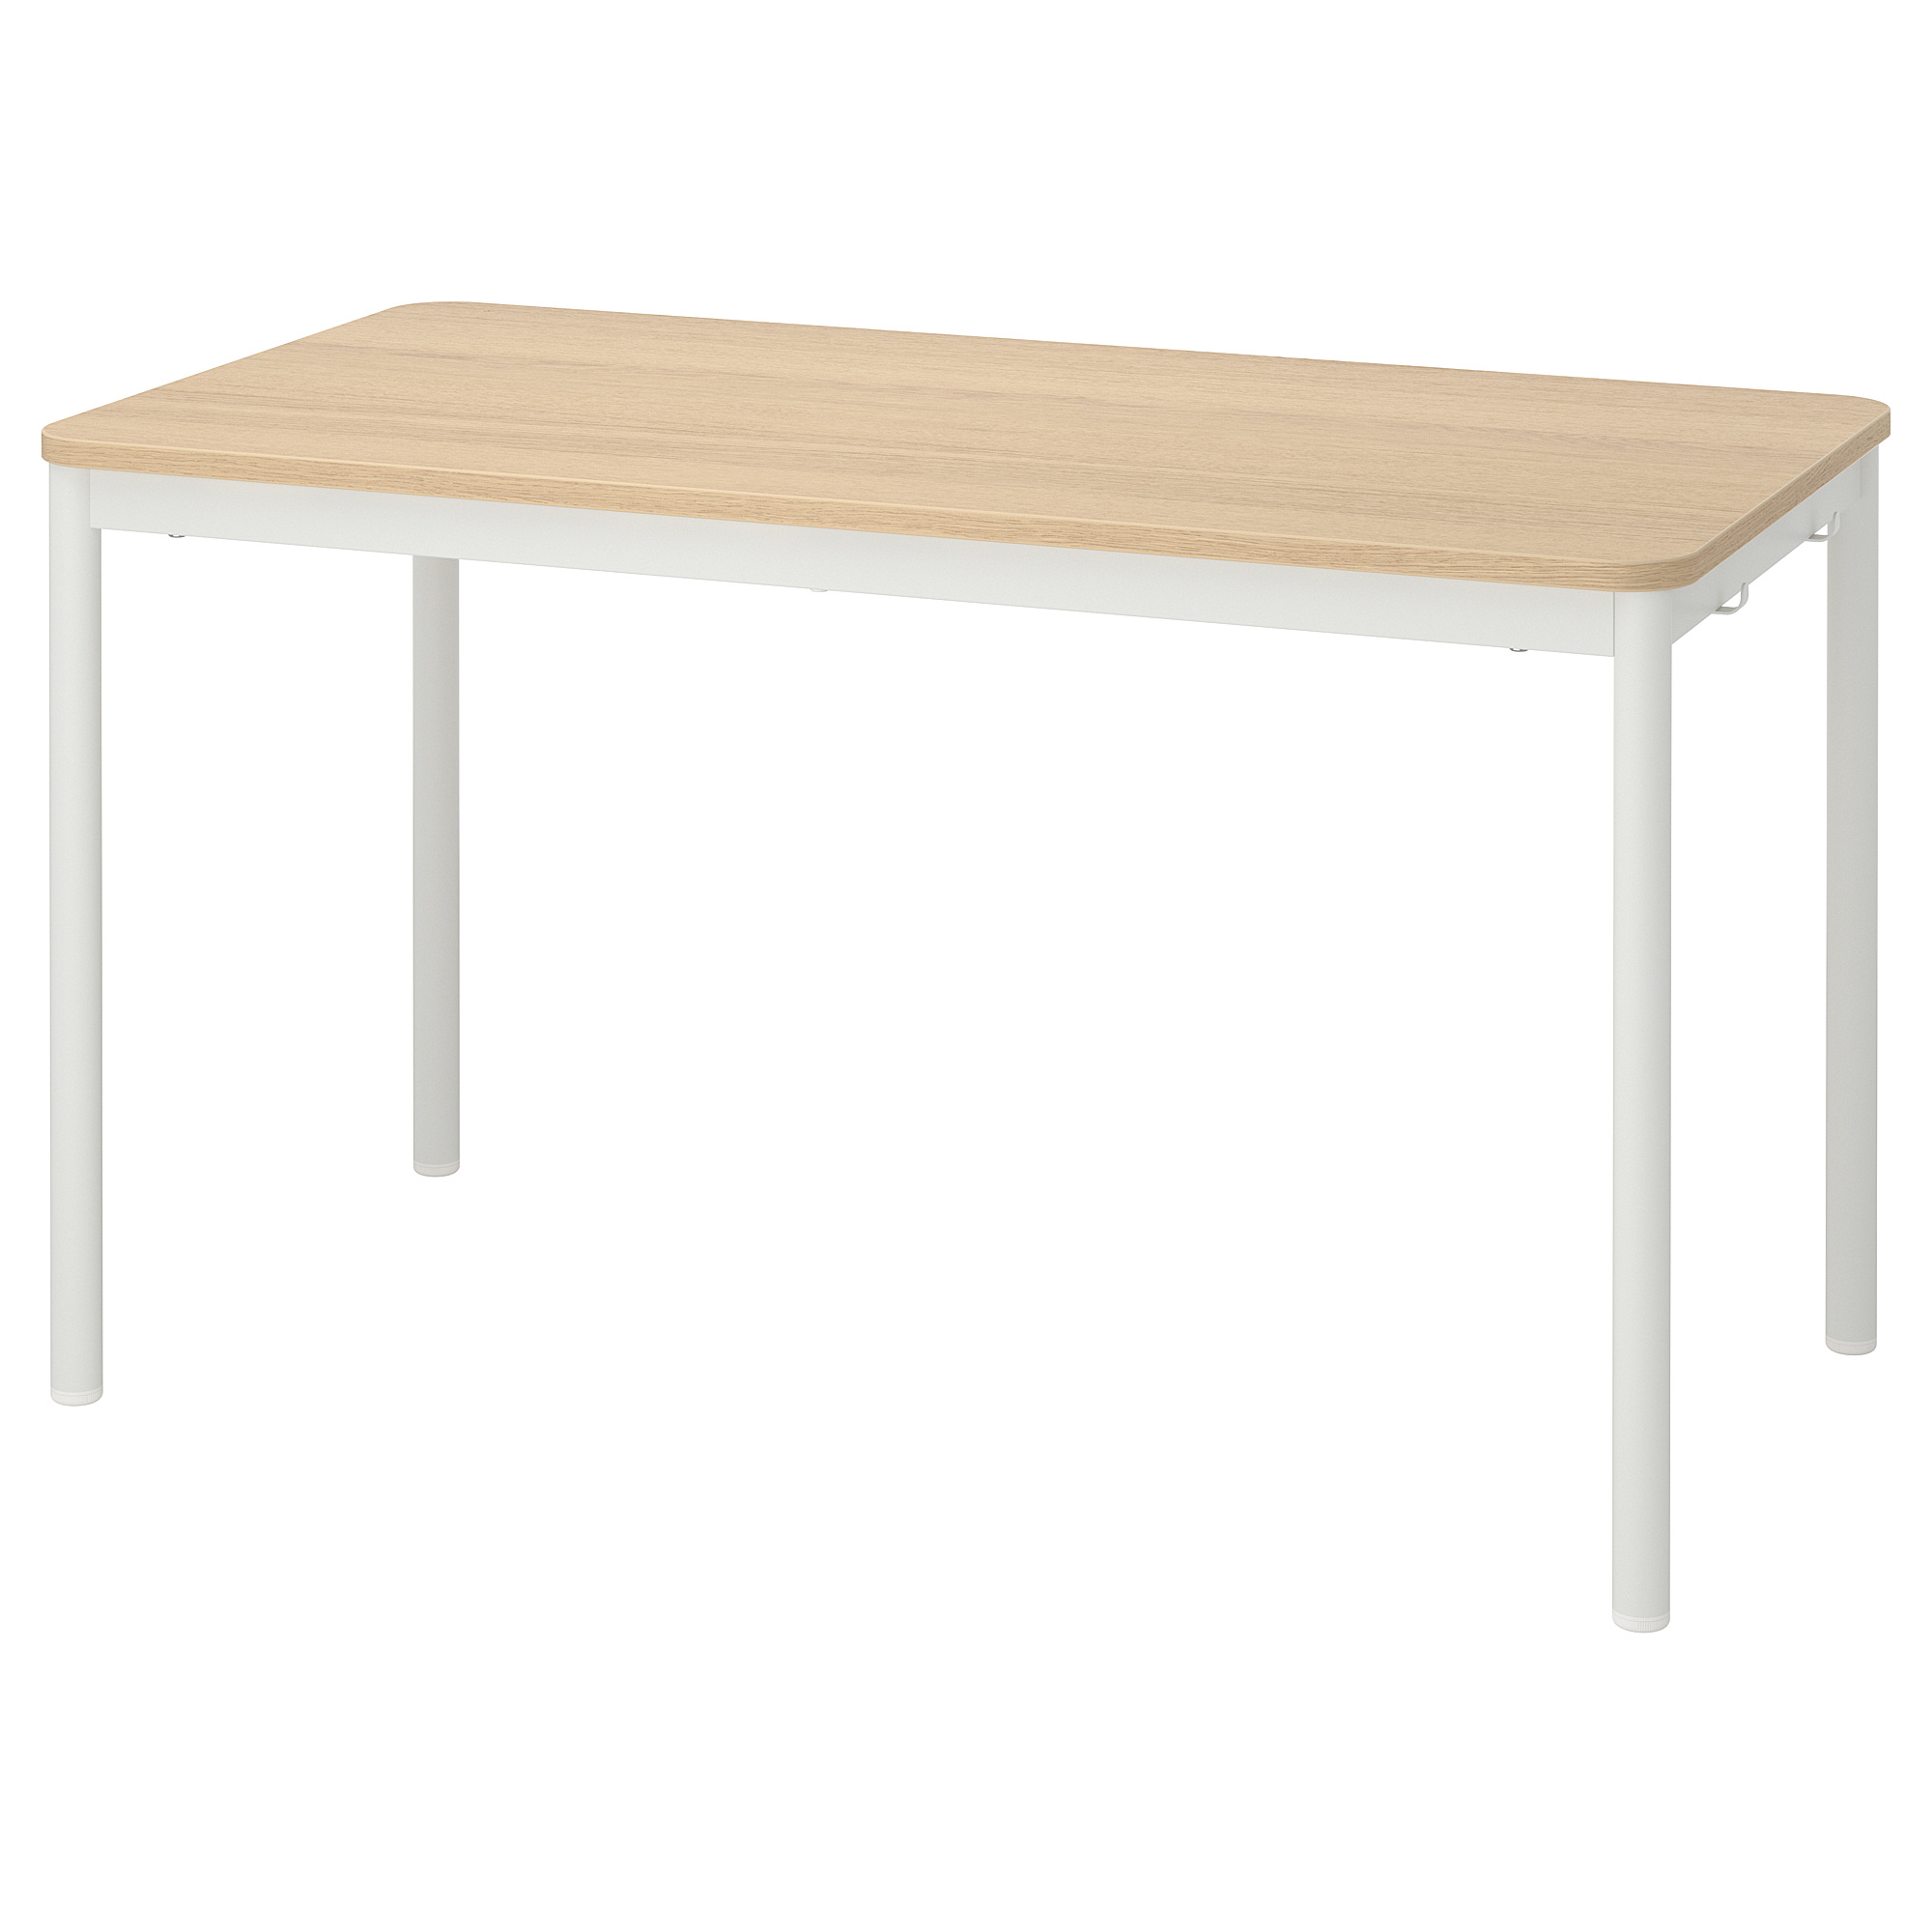 TOMMARYD table